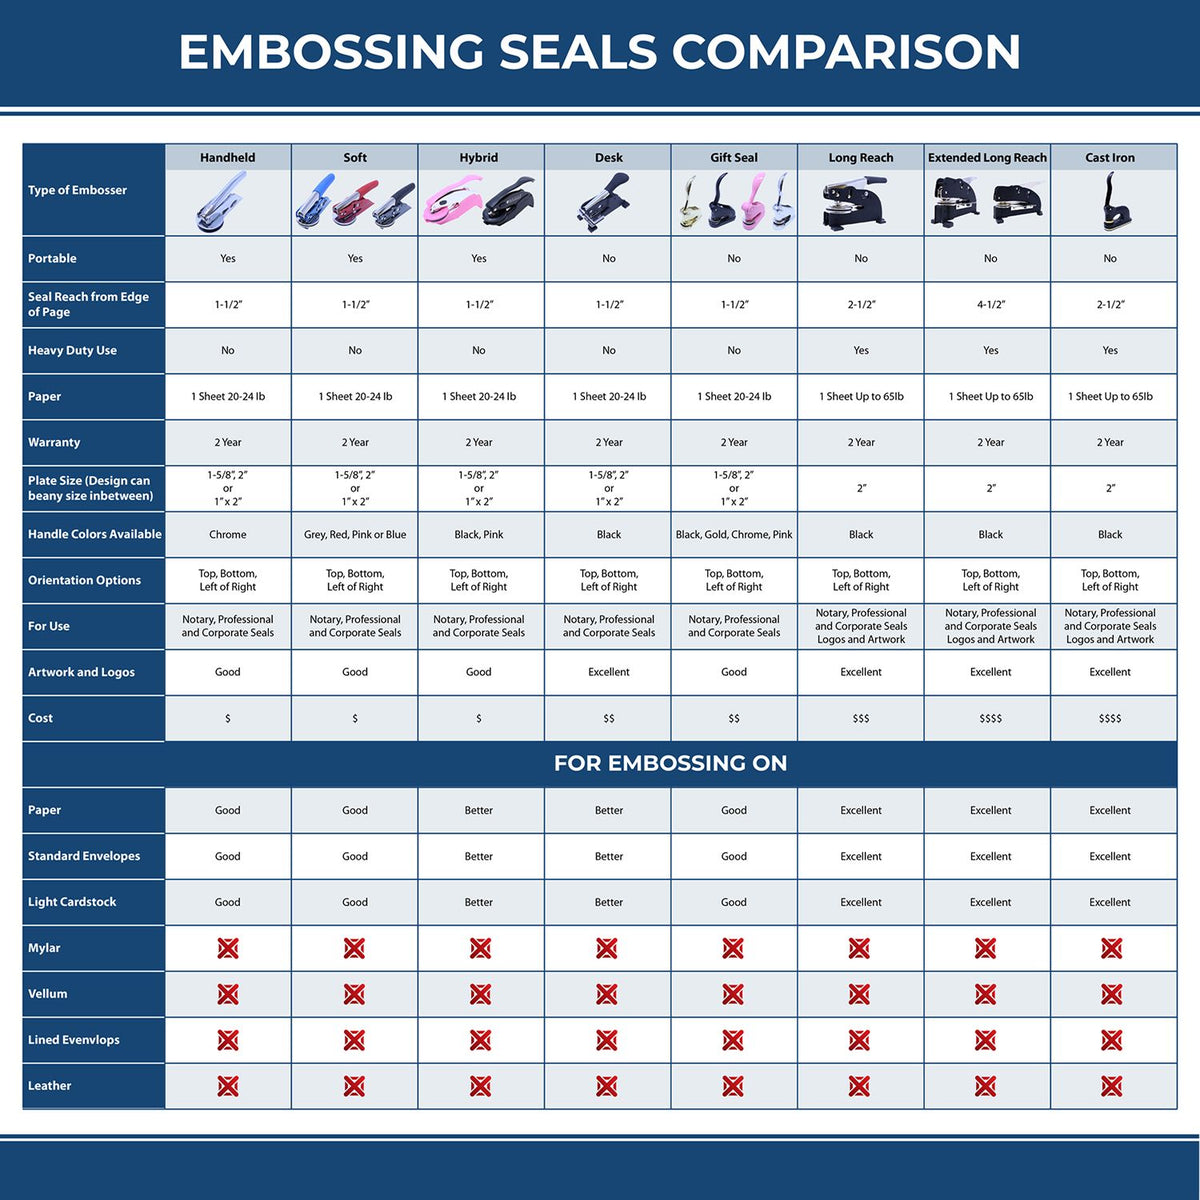 A comparison chart for the different types of mount models available for the Extended Long Reach Nebraska Surveyor Embosser.